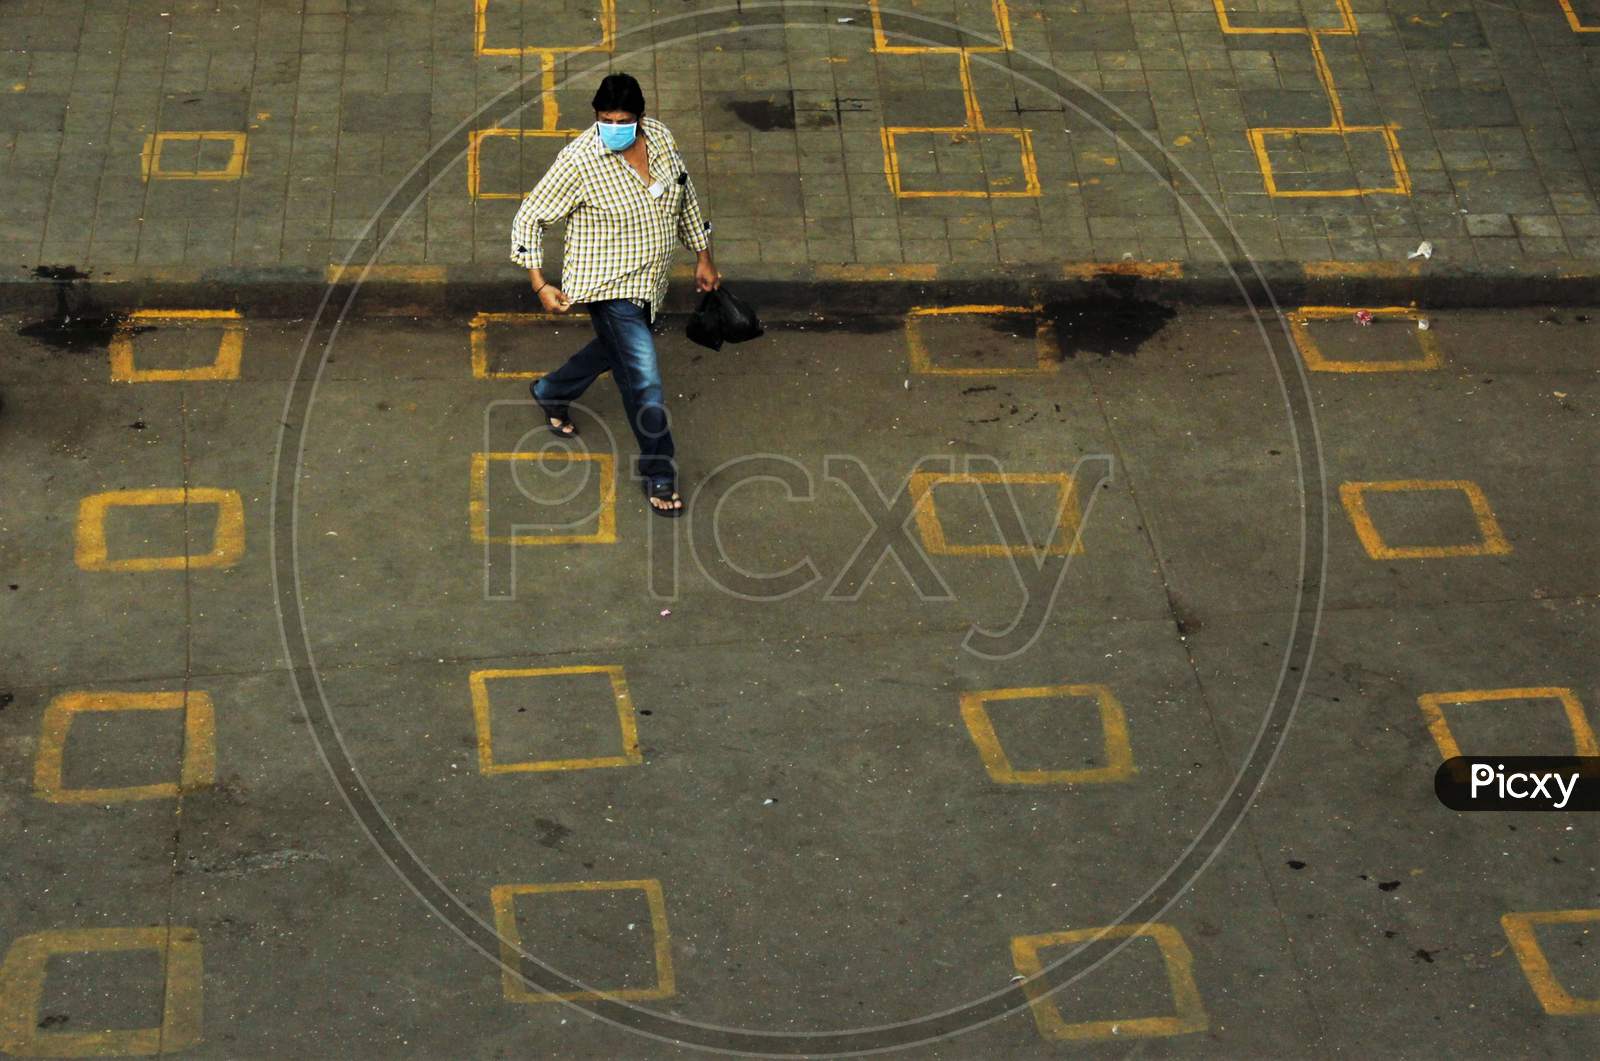 A man wearing protective mask walks on the squares painted by the BMC for maintaining physical distance at a market place to limit the spread of the coronavirus disease (COVID-19), in Mumbai, India on March 28, 2020.